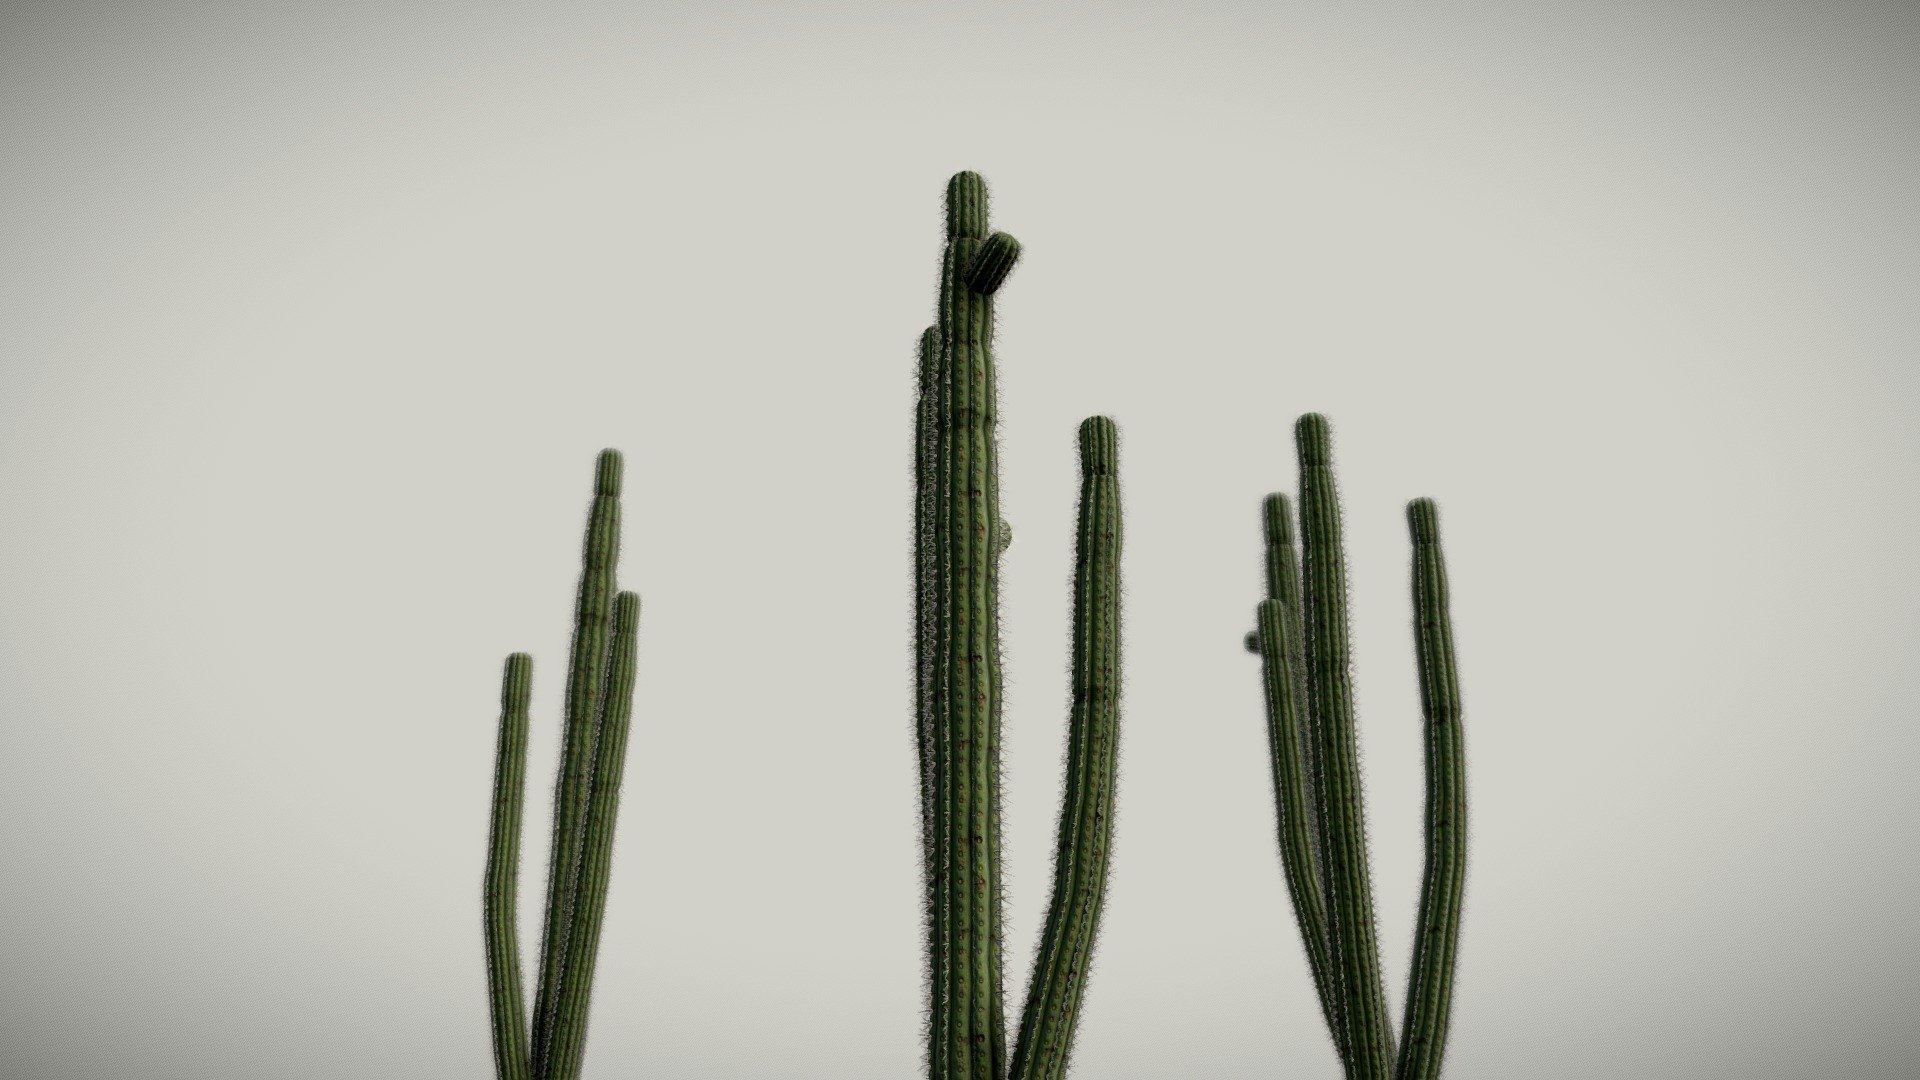 Details

Low Poly Model

LODs (Game Ready) https://sketchfab.com/3d-models/cactus-lods-sample-47f7251a654244fcbc0ea01e152406e7

3 Variations

2k x 4K textures

Contact me for any issue or questions https://www.artstation.com/bpaul/profile 

Artwork https://www.artstation.com/artwork/zAYeo6 - Cactus - Buy Royalty Free 3D model by Paul (@nathan.d1563) 3d model